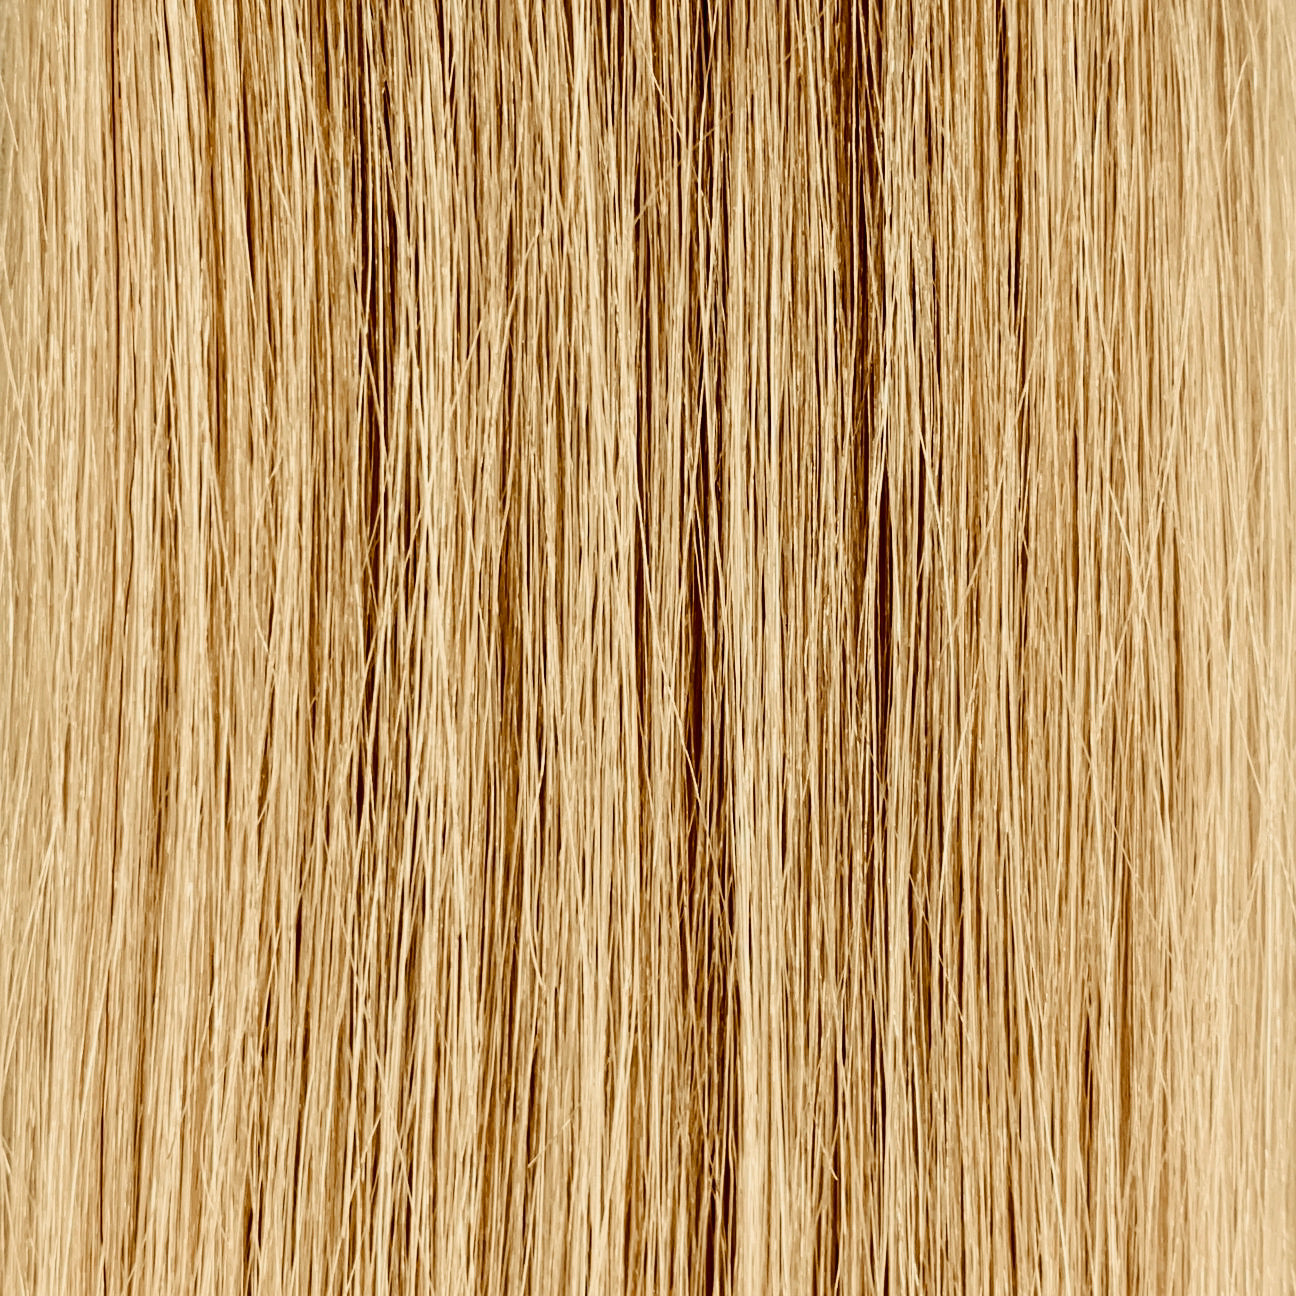 50 cm | Normal Tape Extensions | No. 14 dark blond gold